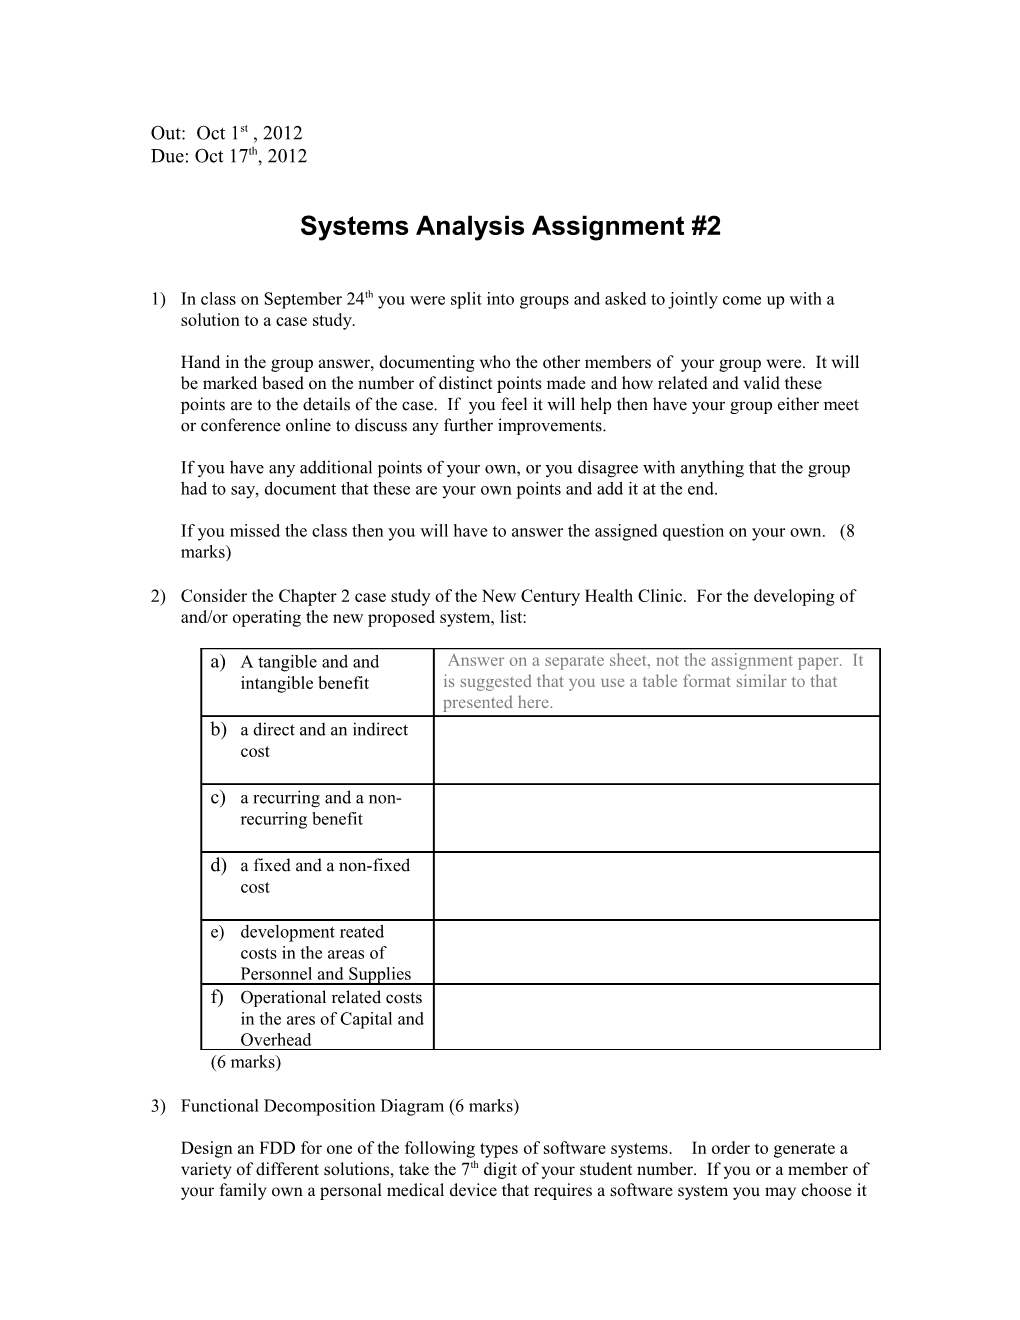 Systems Analysis Assignment #2